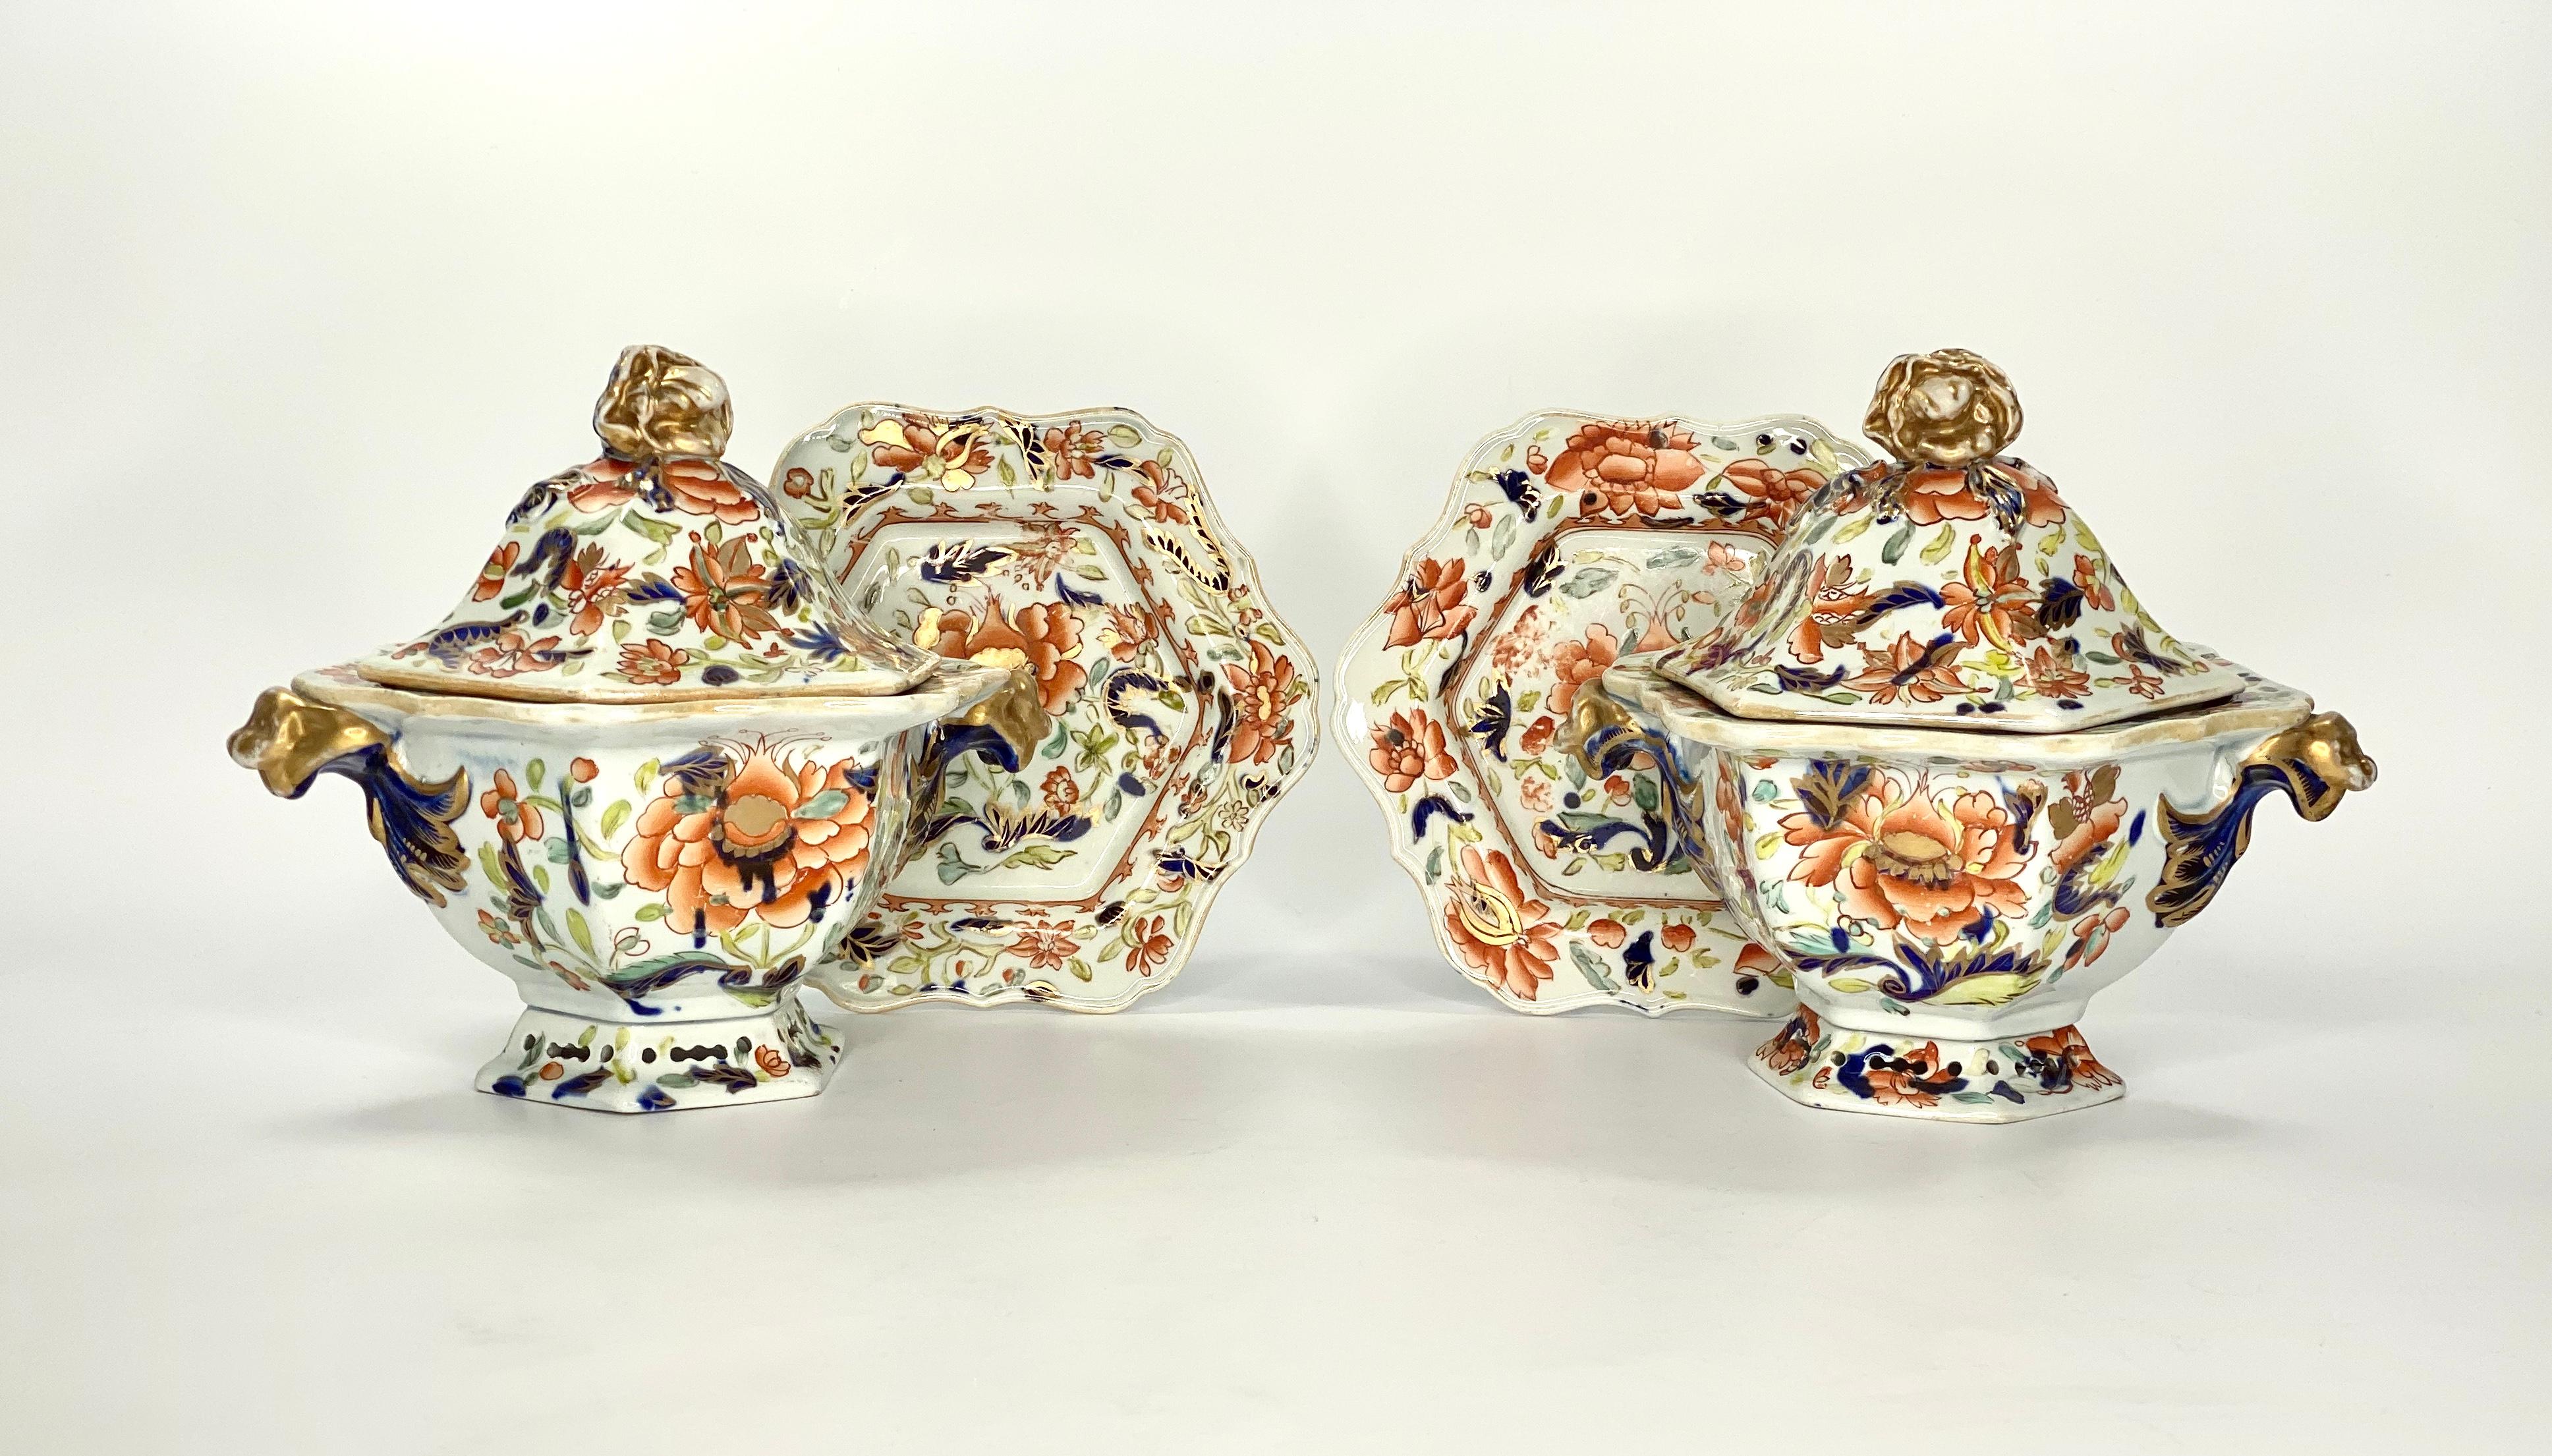 A fine pair of Masons Ironstone sauce tureens, covers and stands, circa 1815. The hexagonal shaped tureens, exuberantly painted in vibrant enamels, underglaze blue and gilding, with flowering plants. Grotesque beast handles, terminating in scroll